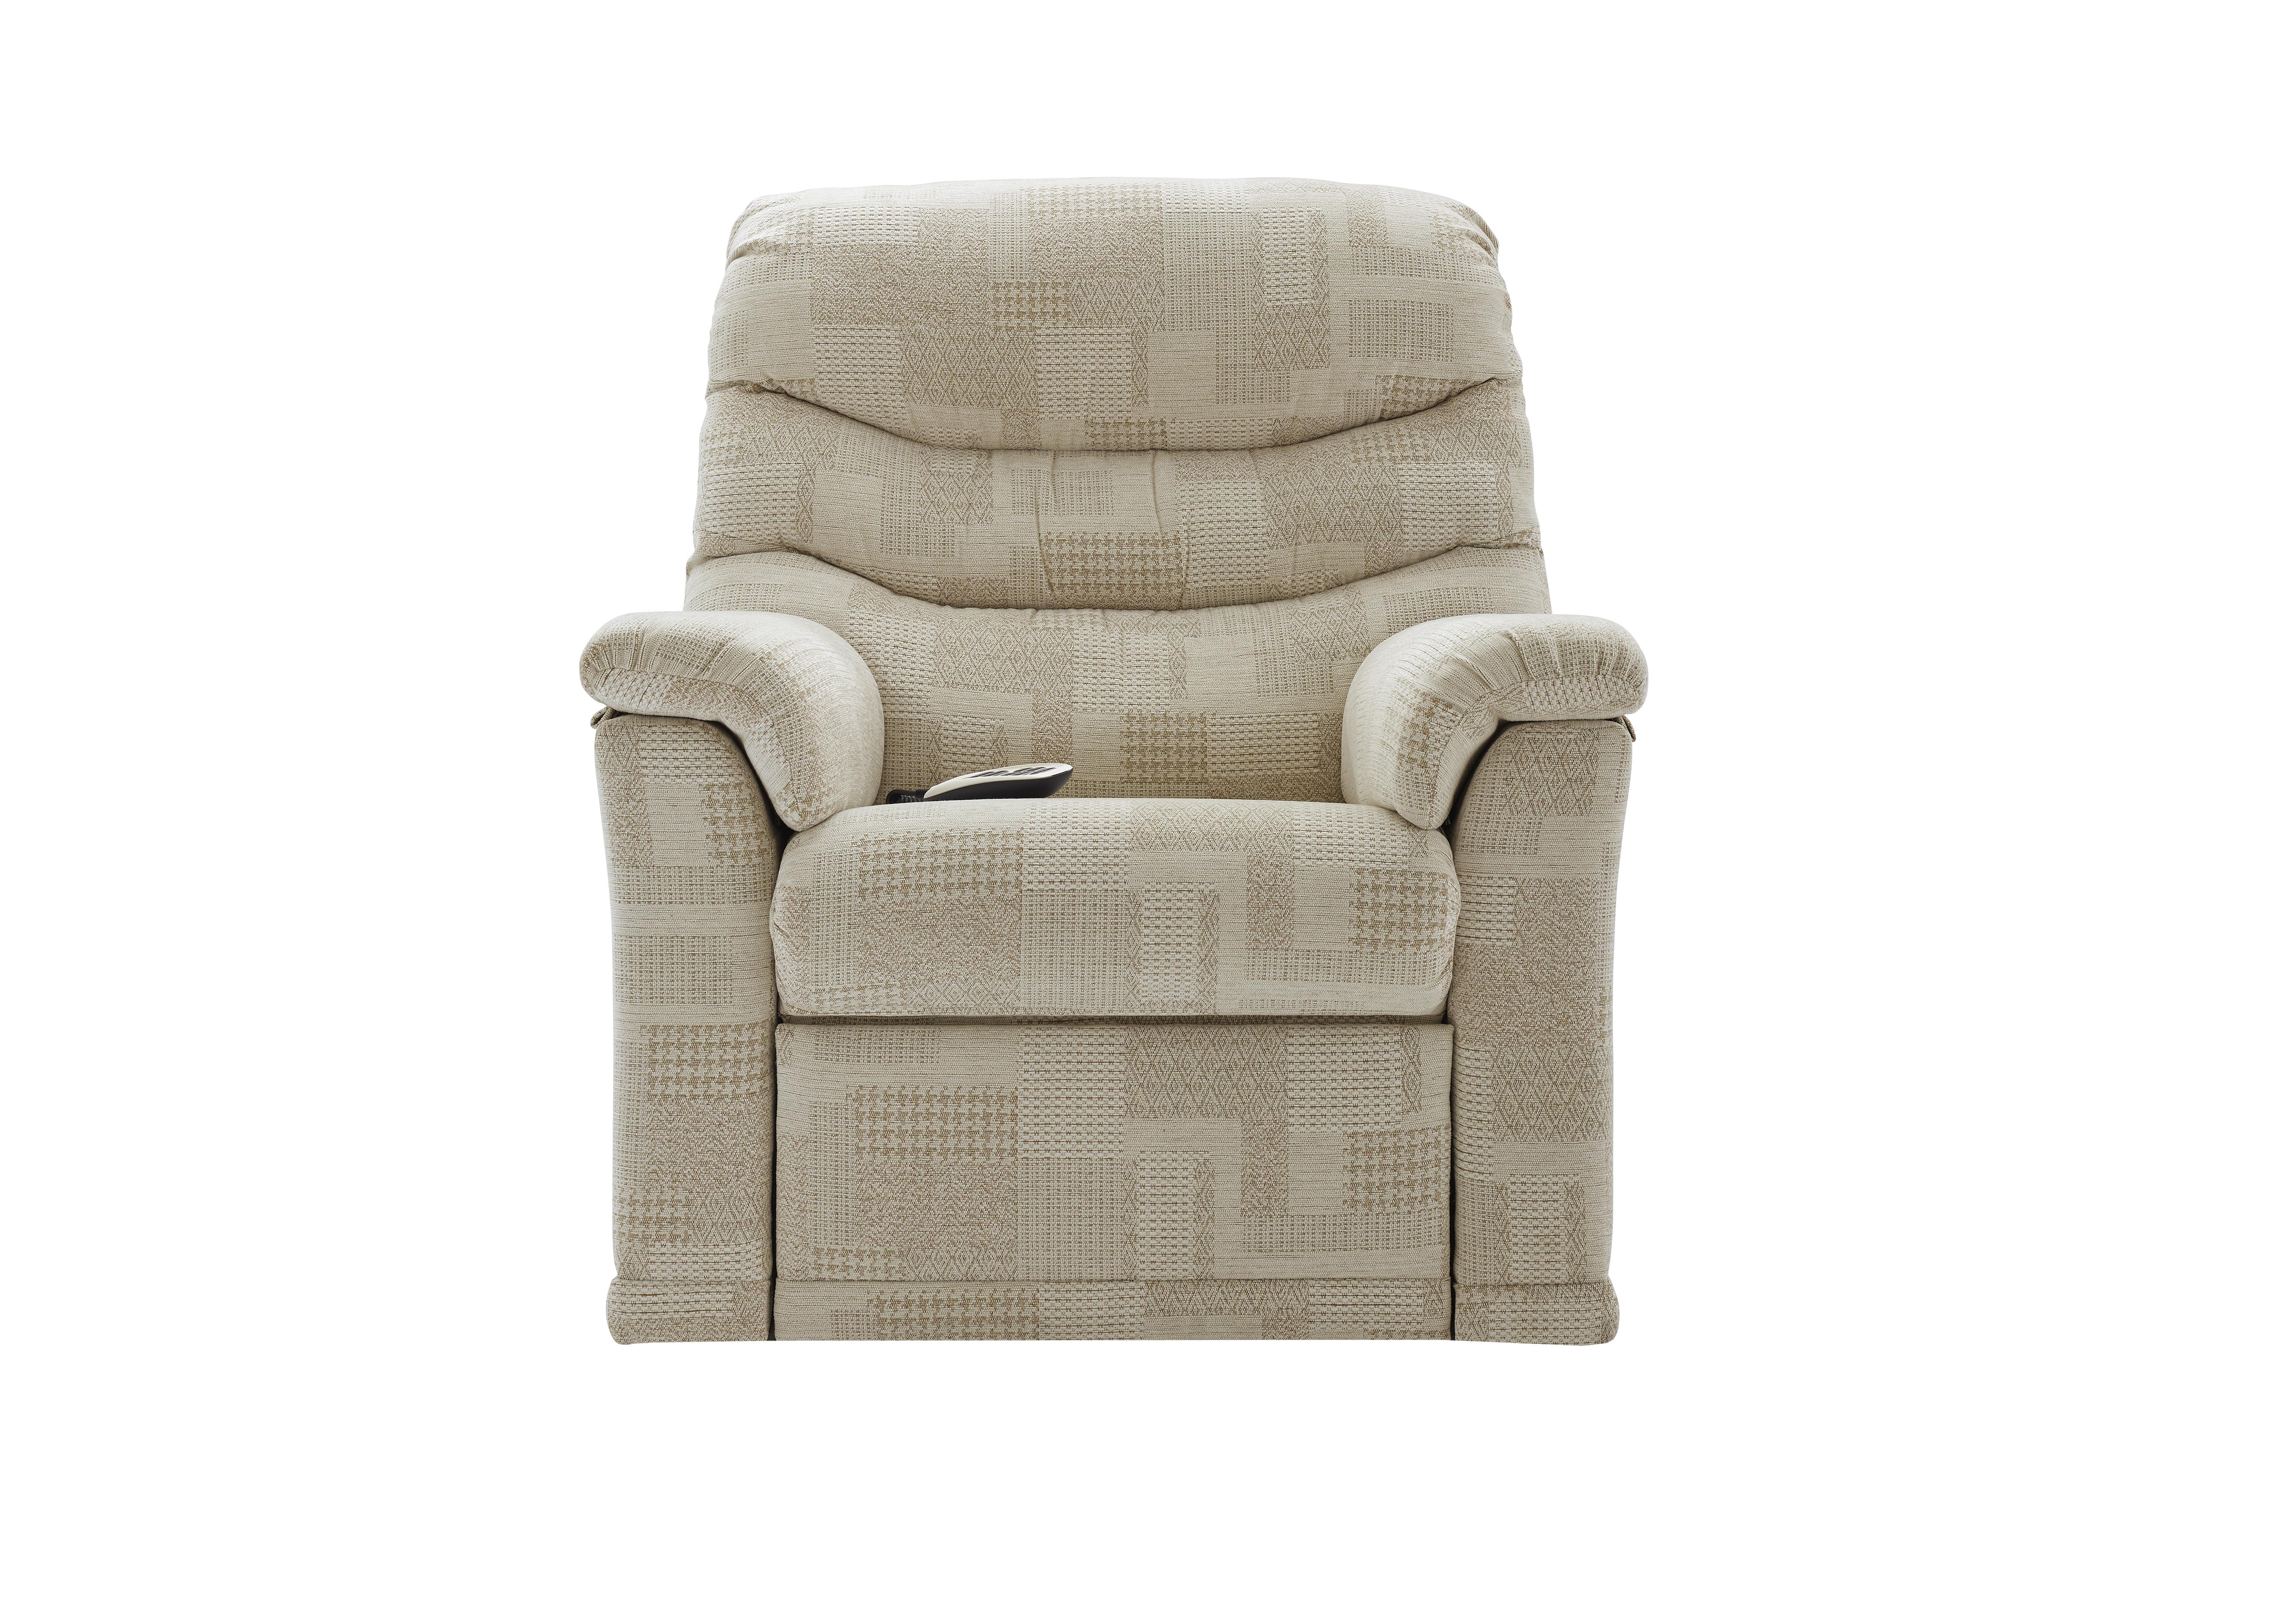 Malvern Fabric Rise and Recline Armchair in B430 Lydia Multi on Furniture Village